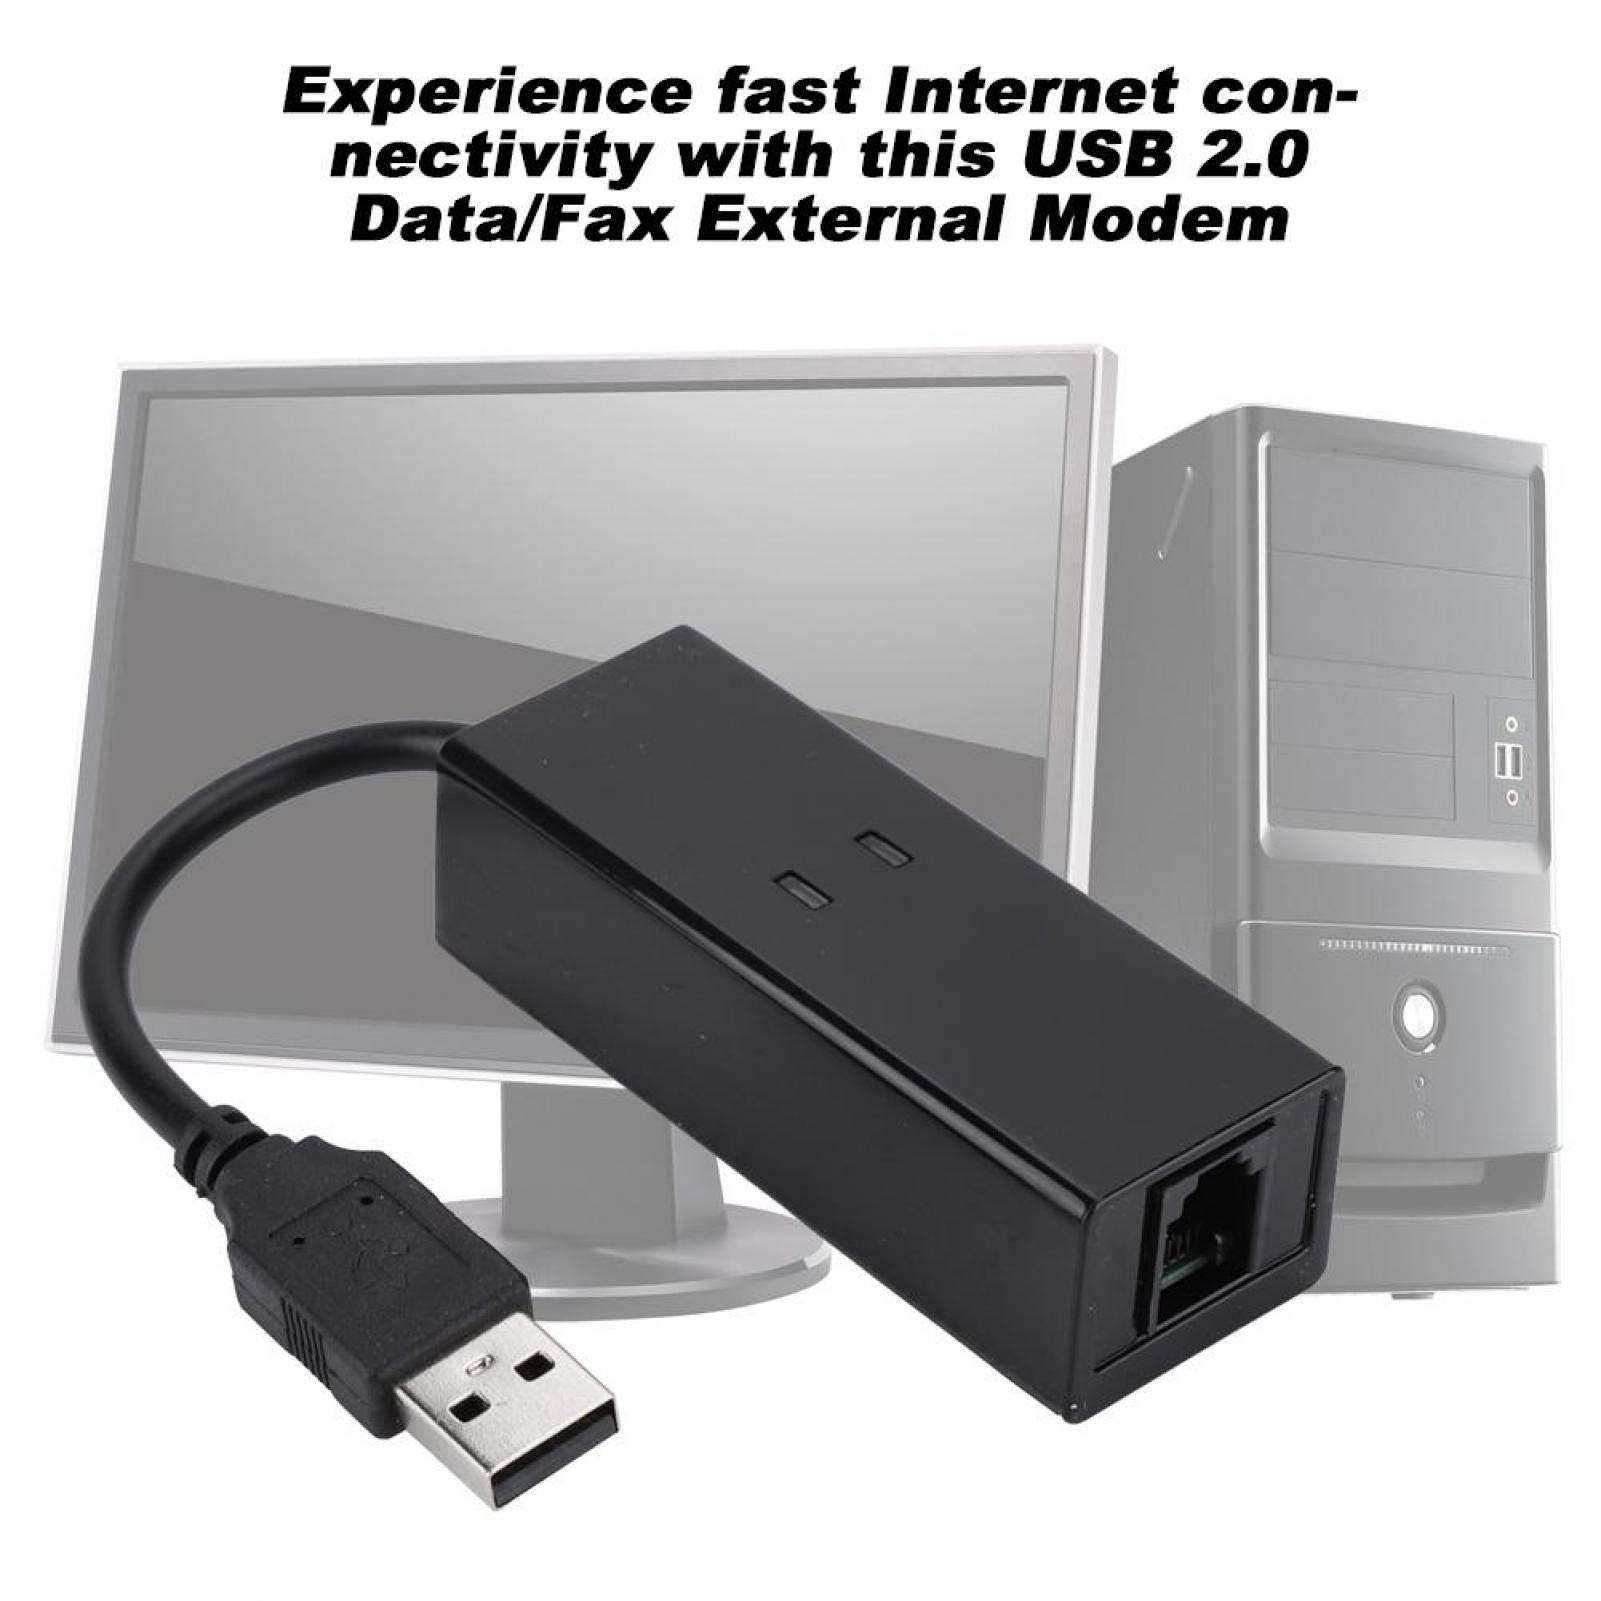 Vipxyc Data Modem, USB 2.0 External Dial Up Voice Fax Data Modem Fit 56K Download Speeds Supports Caller ID for Win7 Win8 Win10 XP